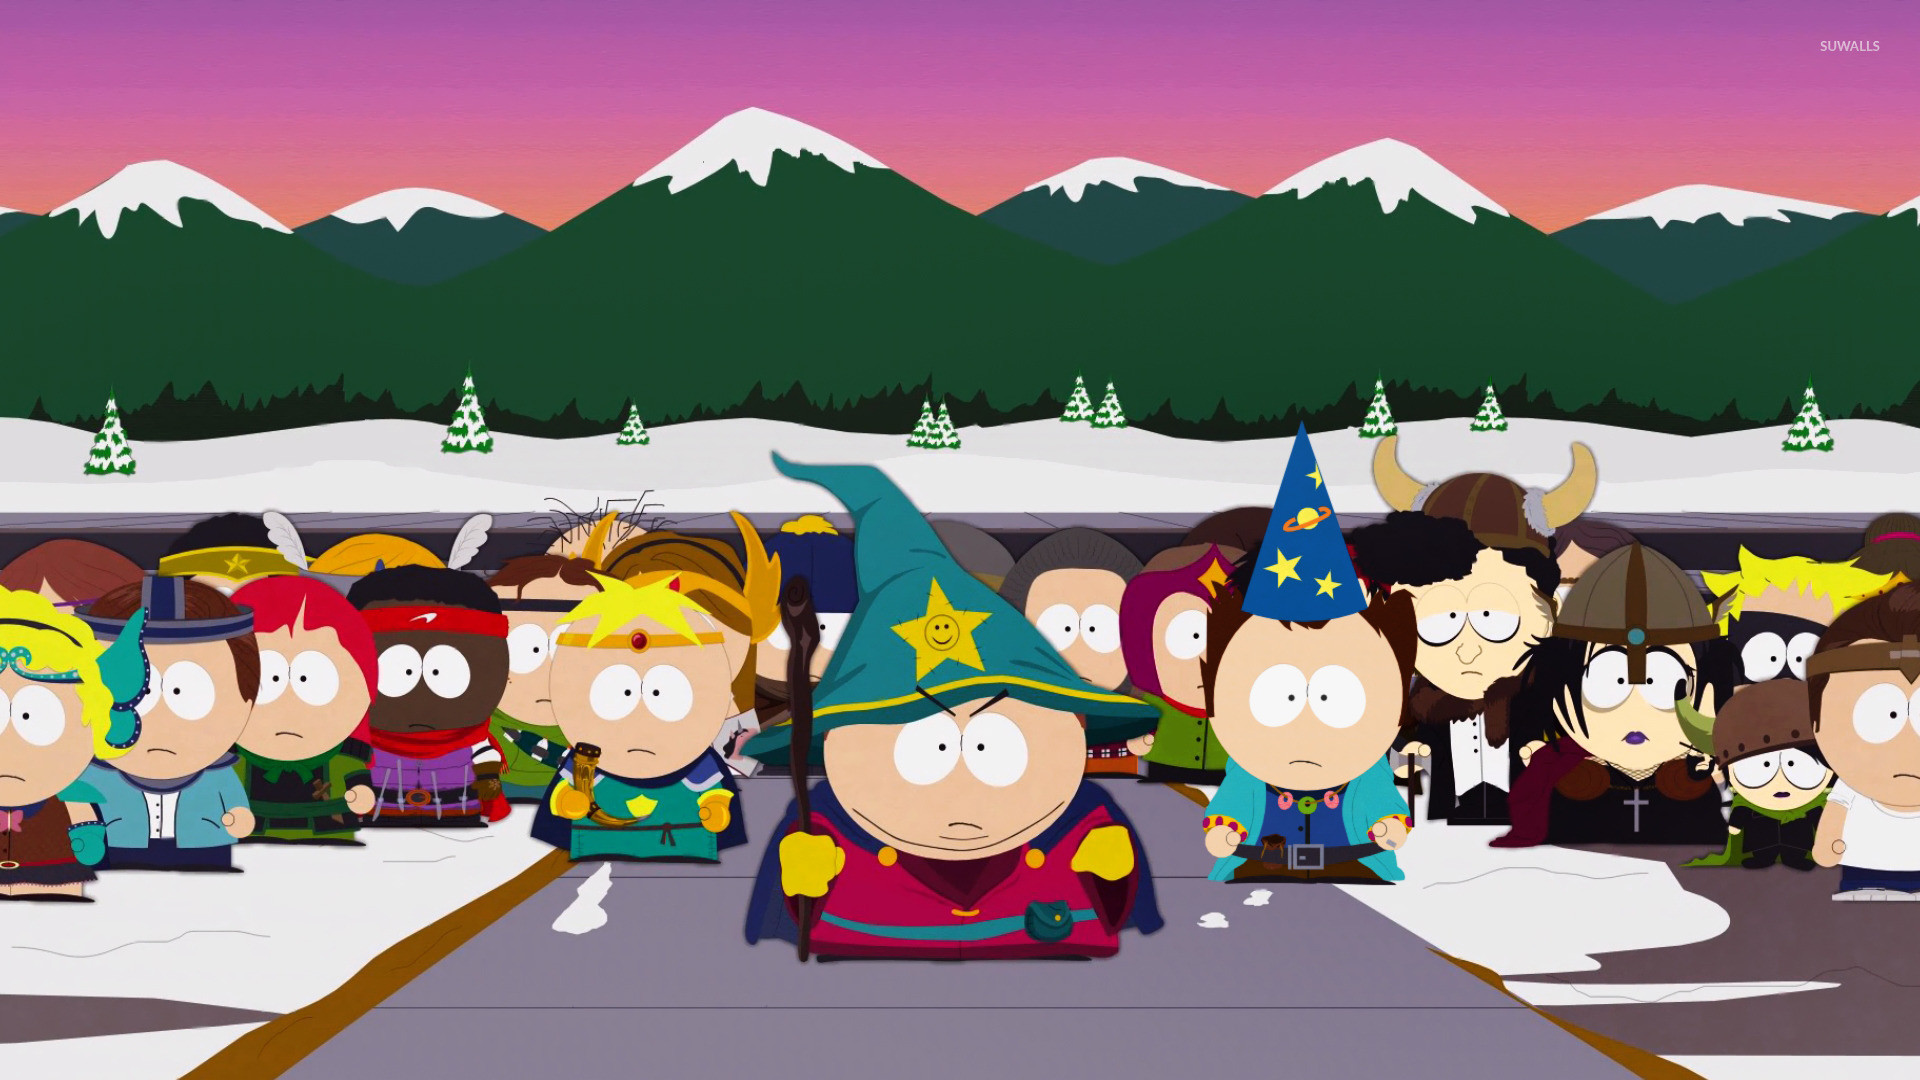 1920x1080, South Park - South Park The Stick Of Truth - HD Wallpaper 